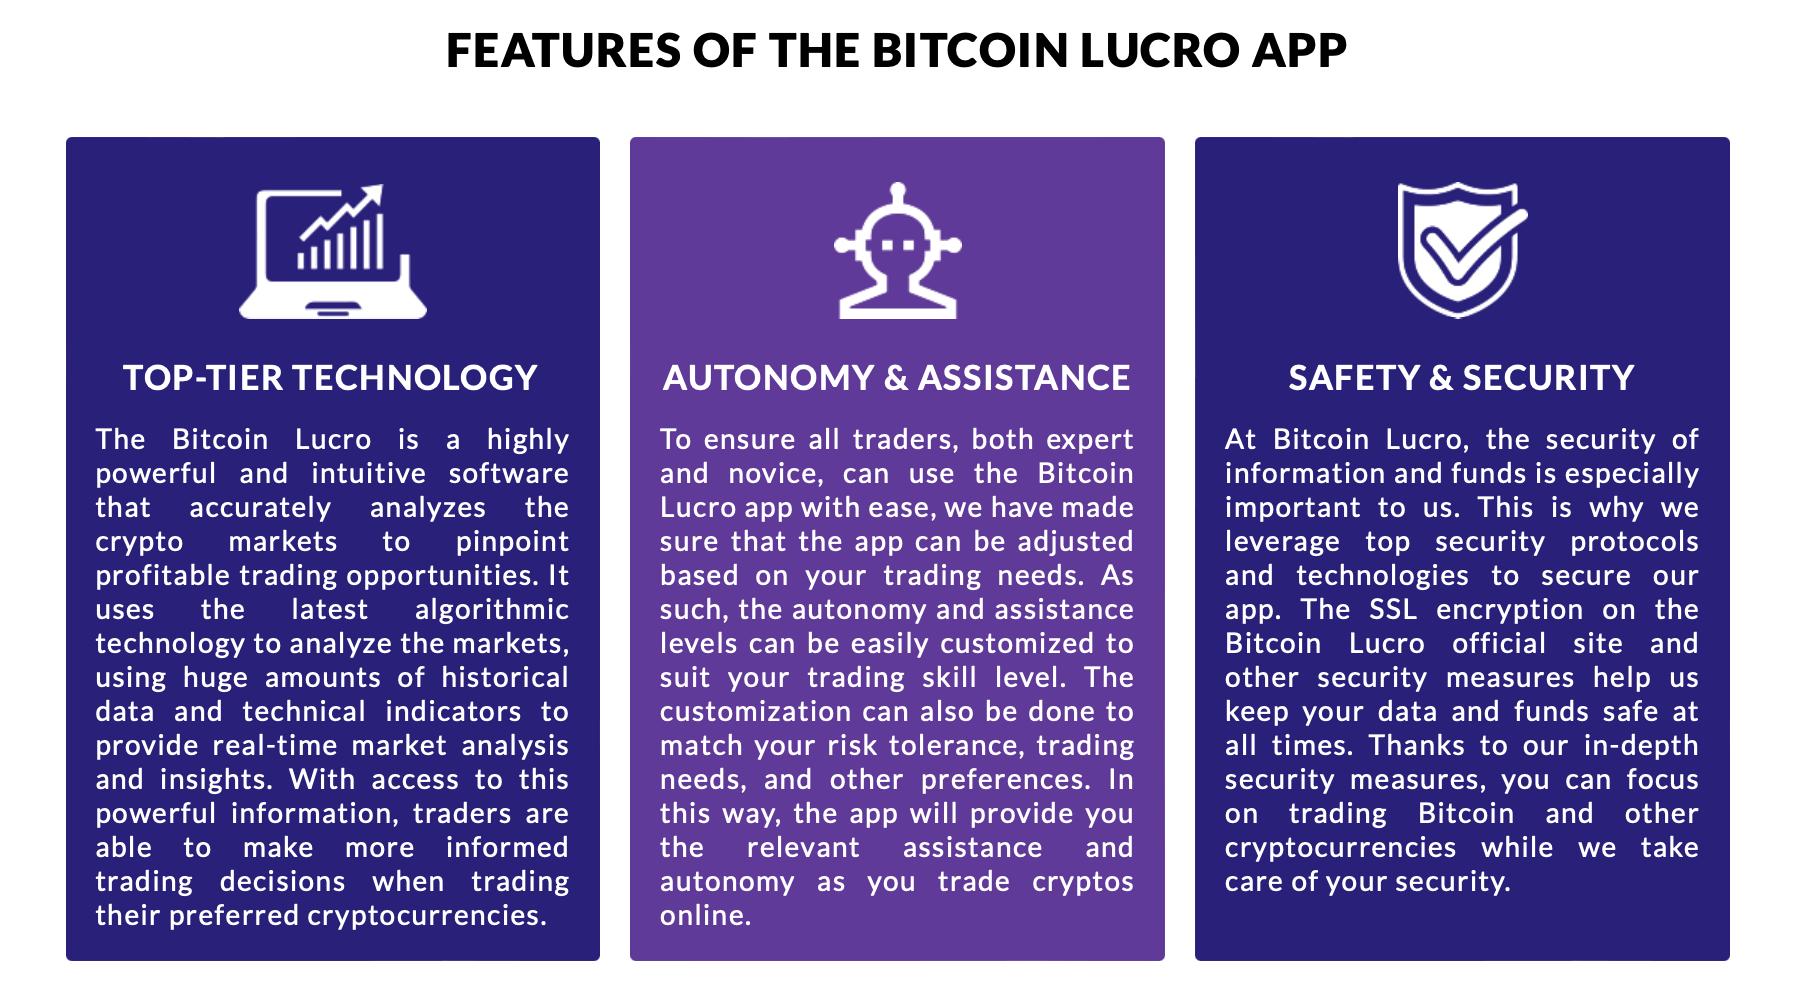 Features of the Bitcoin Lucro App